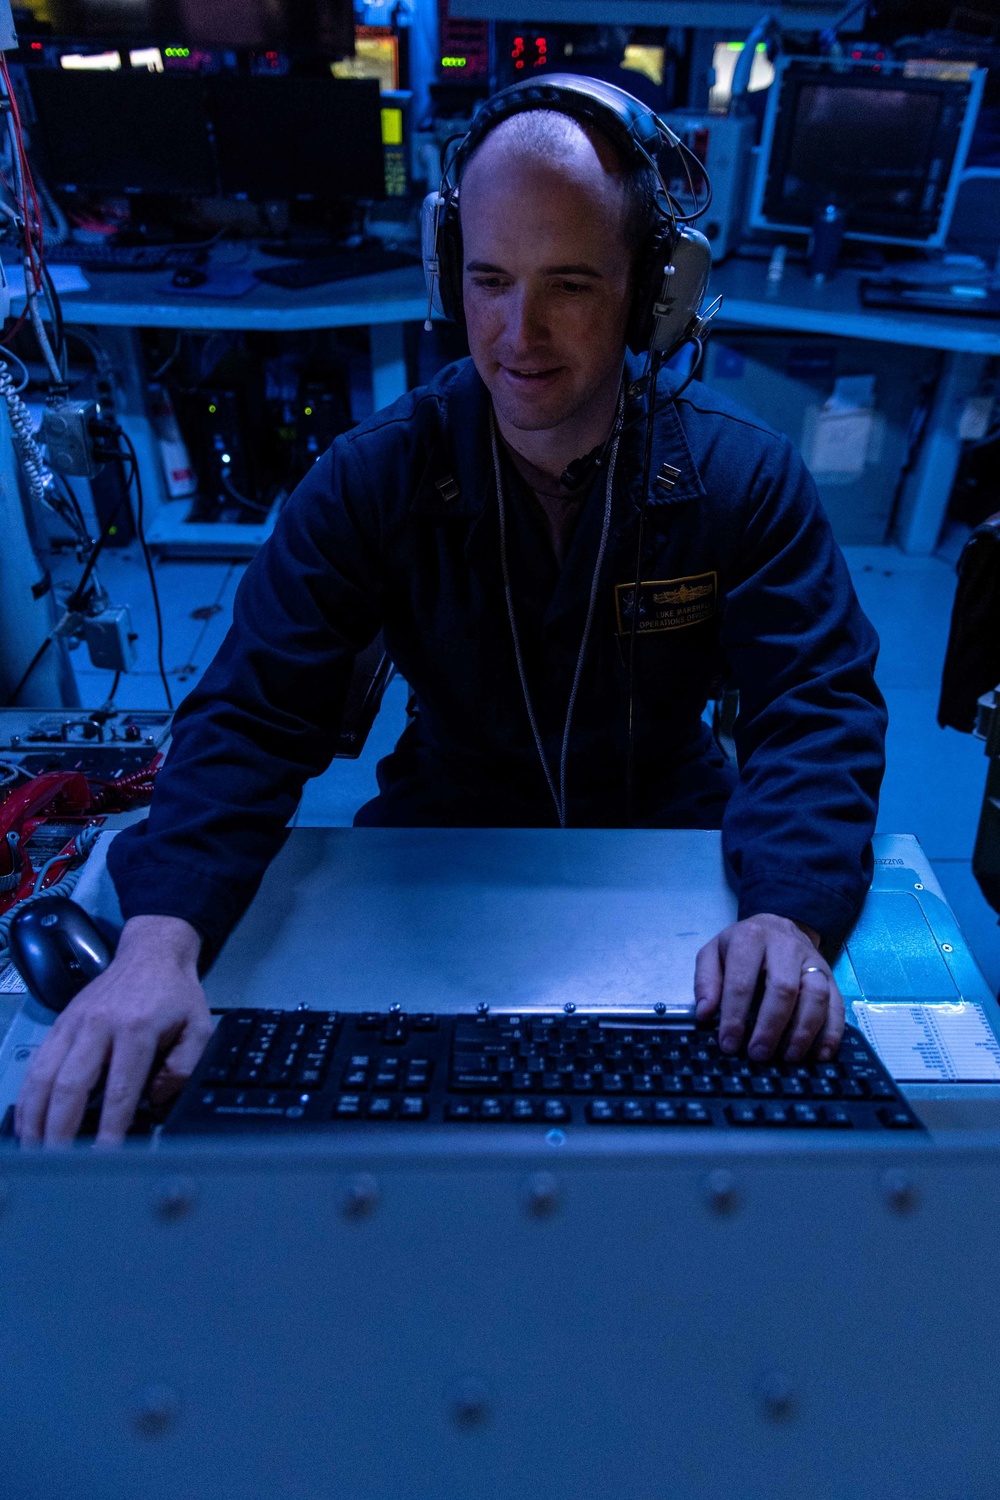 James E. Williams Conducts Operations in the 5th Fleet Area of Operations